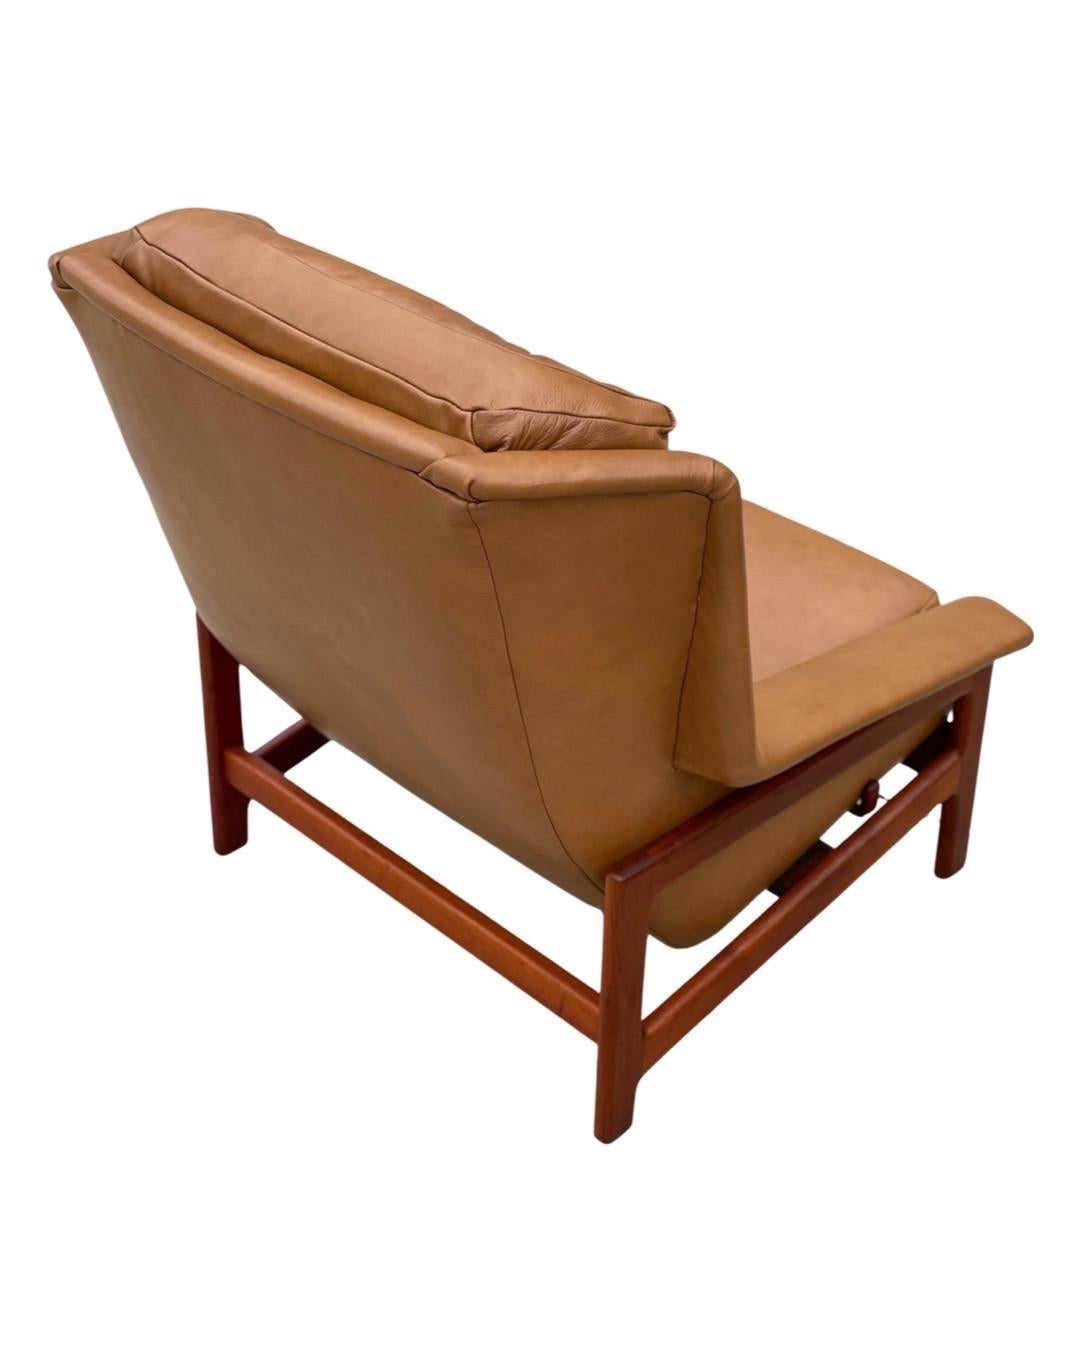 Folke Ohlsson for DUX Reclining + Rocking Lounge Chair in Leather + Walnut 1